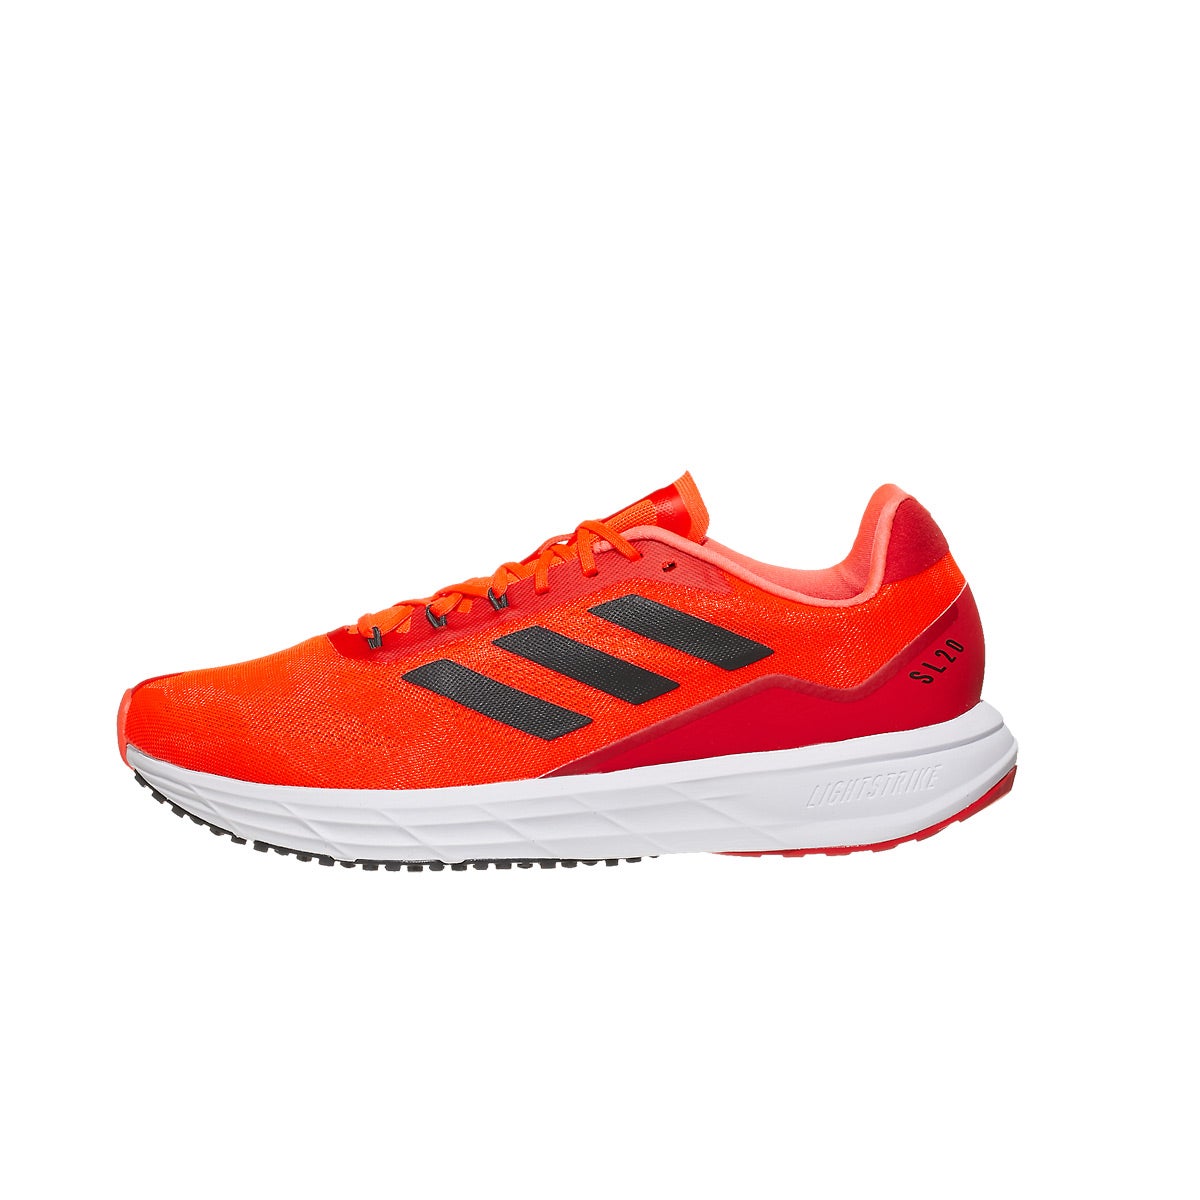 adidas SL20.2 Men's Shoes Solar Red/White/Carbon 360° View | Running ...